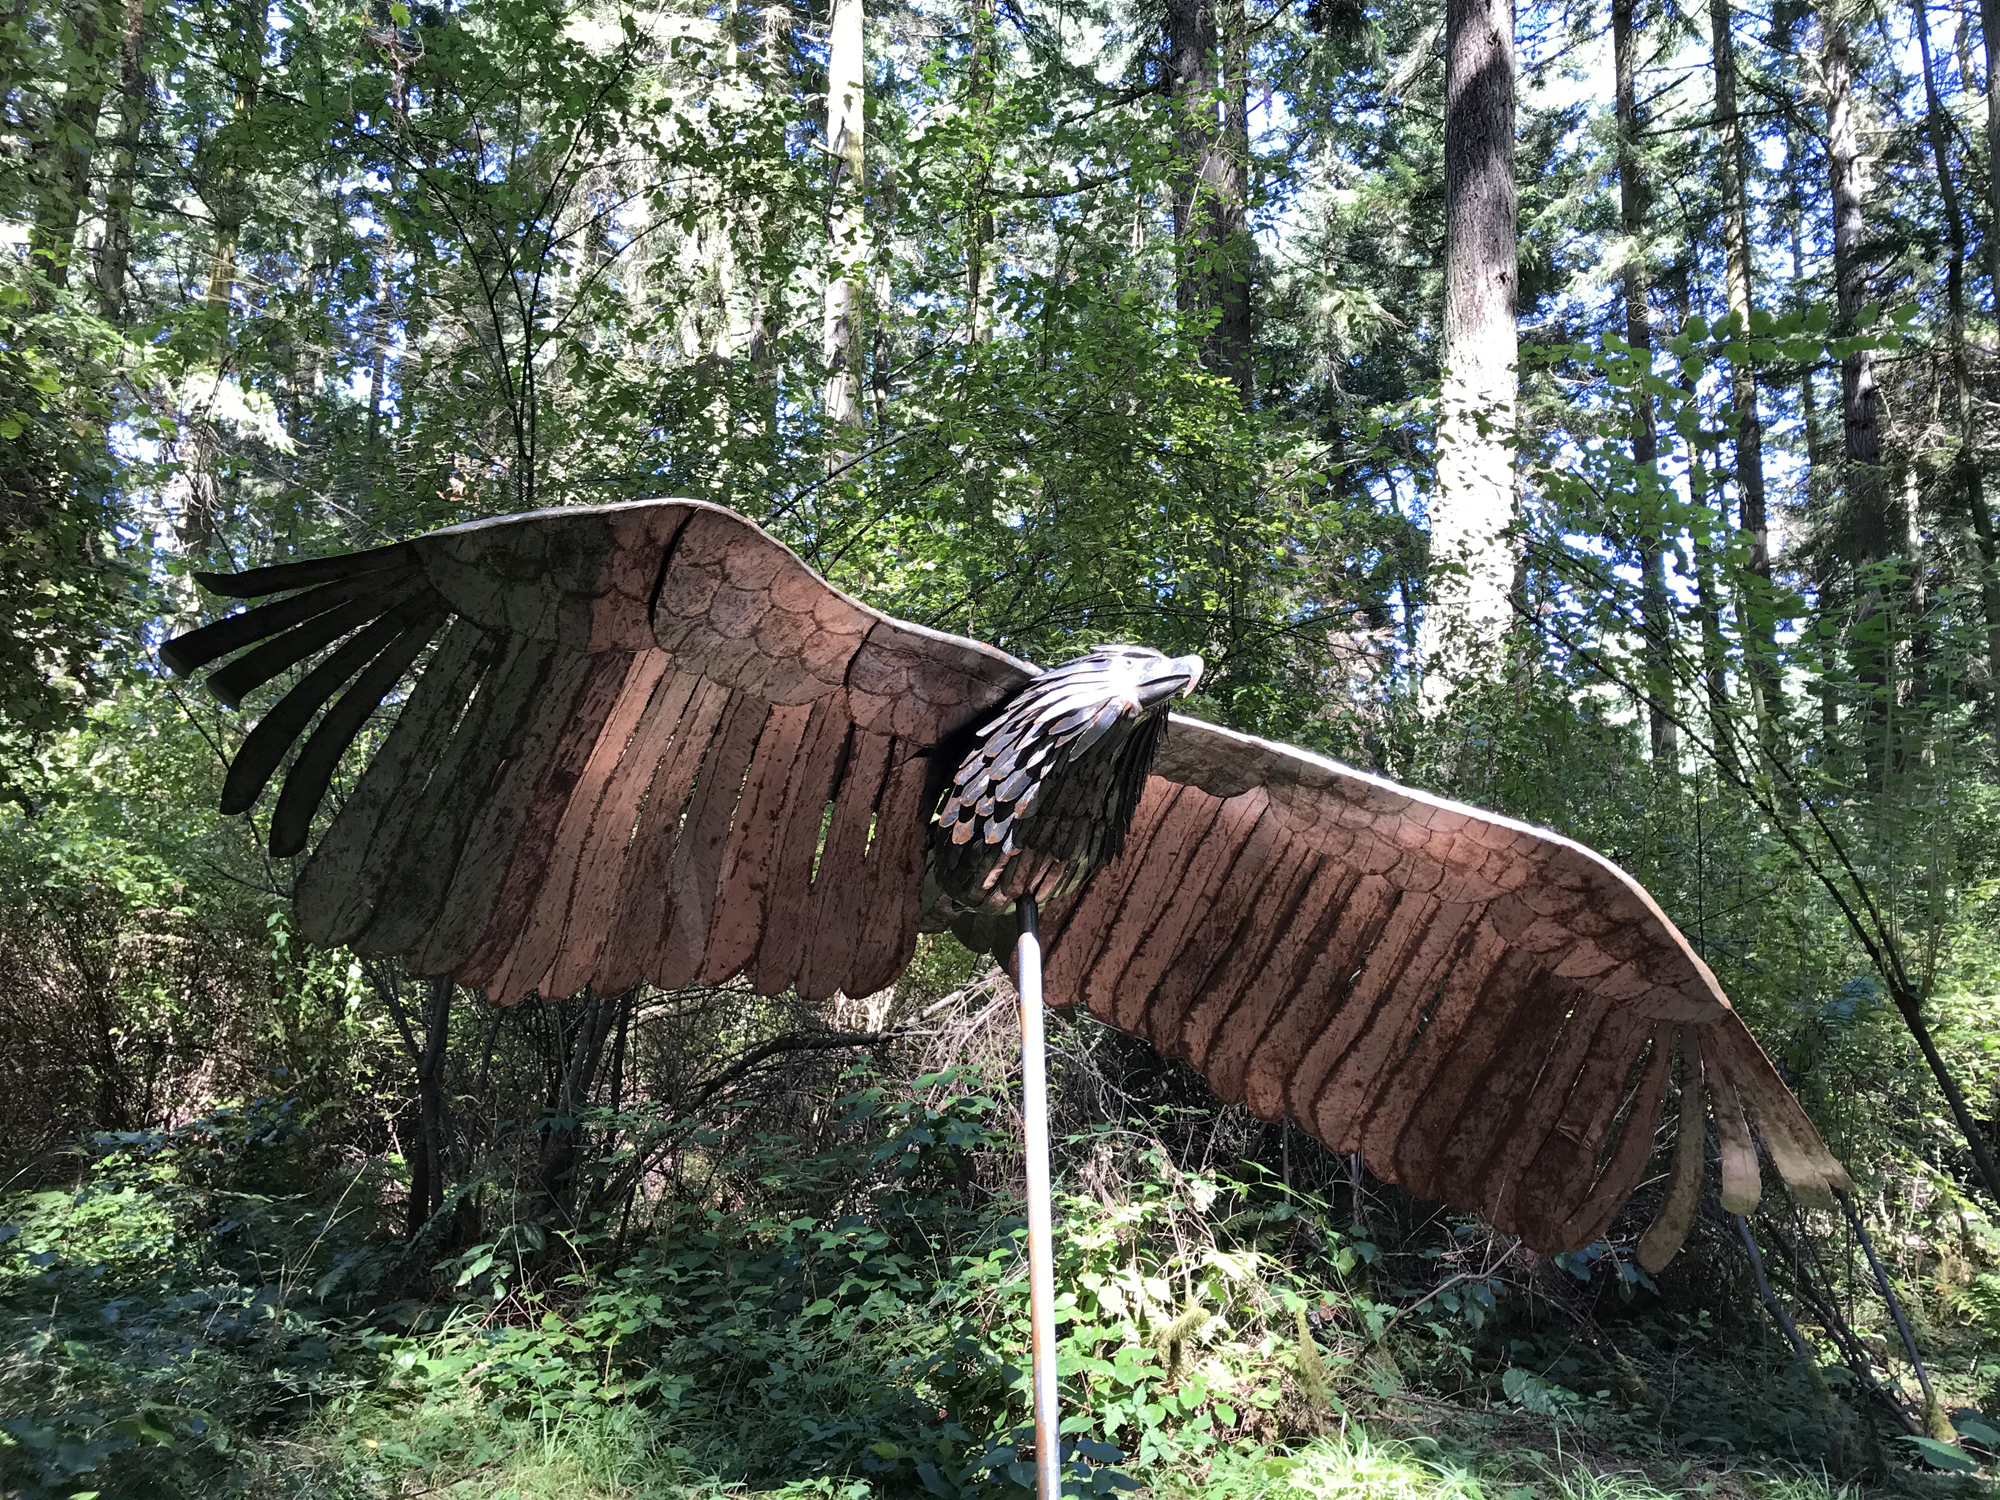 Sculptor Greg Neal sculpture Soaring Eagle at Price Sculpture Forest sculpture park in Coupeville on Whidbey Island